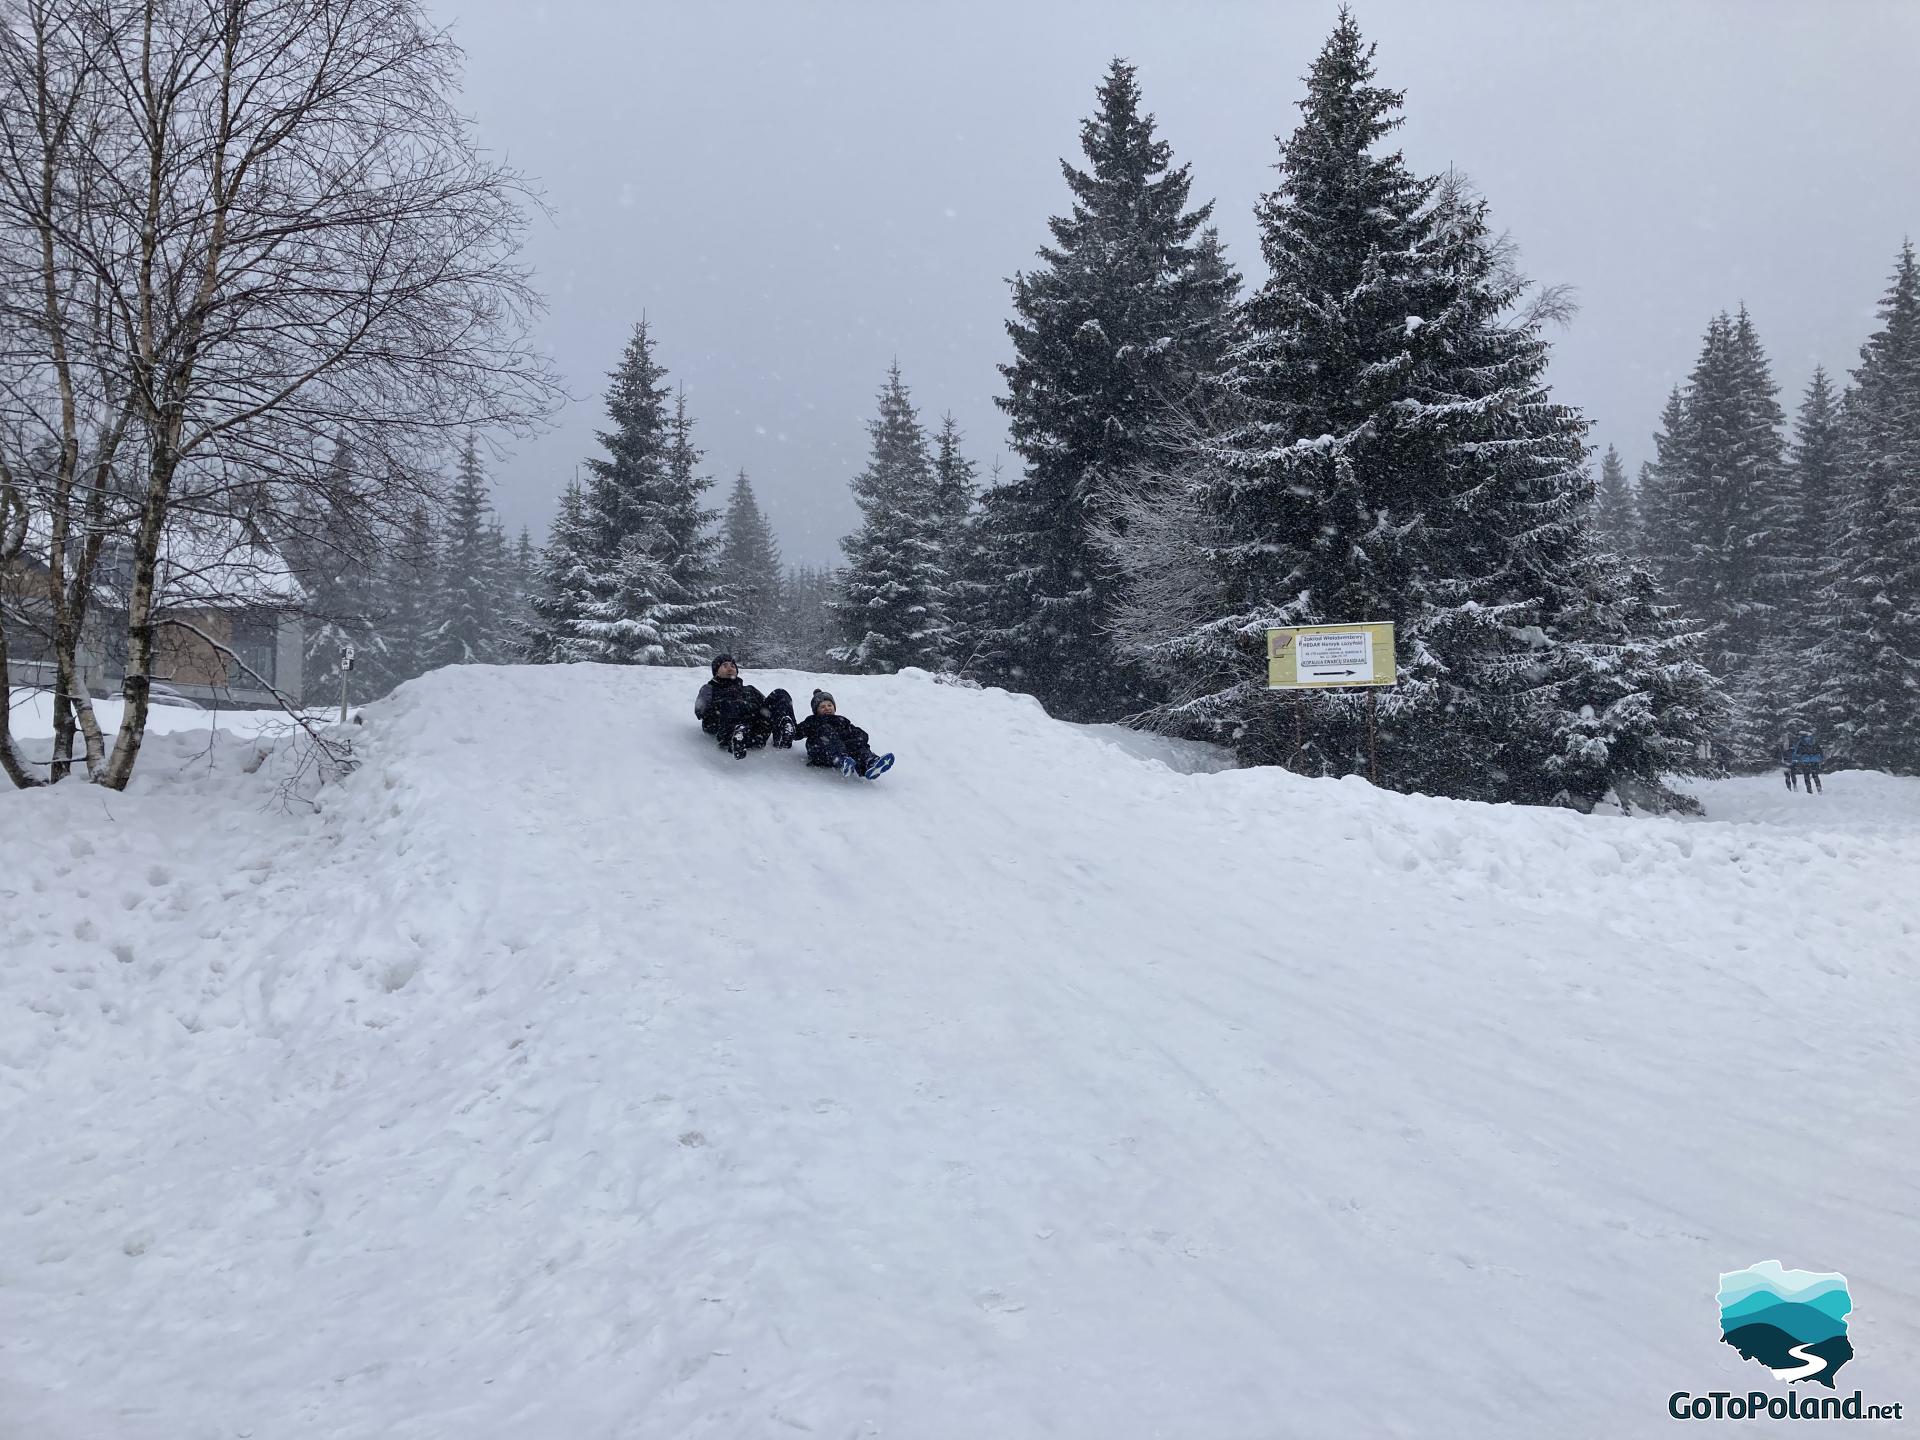 A man and his son sledding down a small hill, spruces in the background 